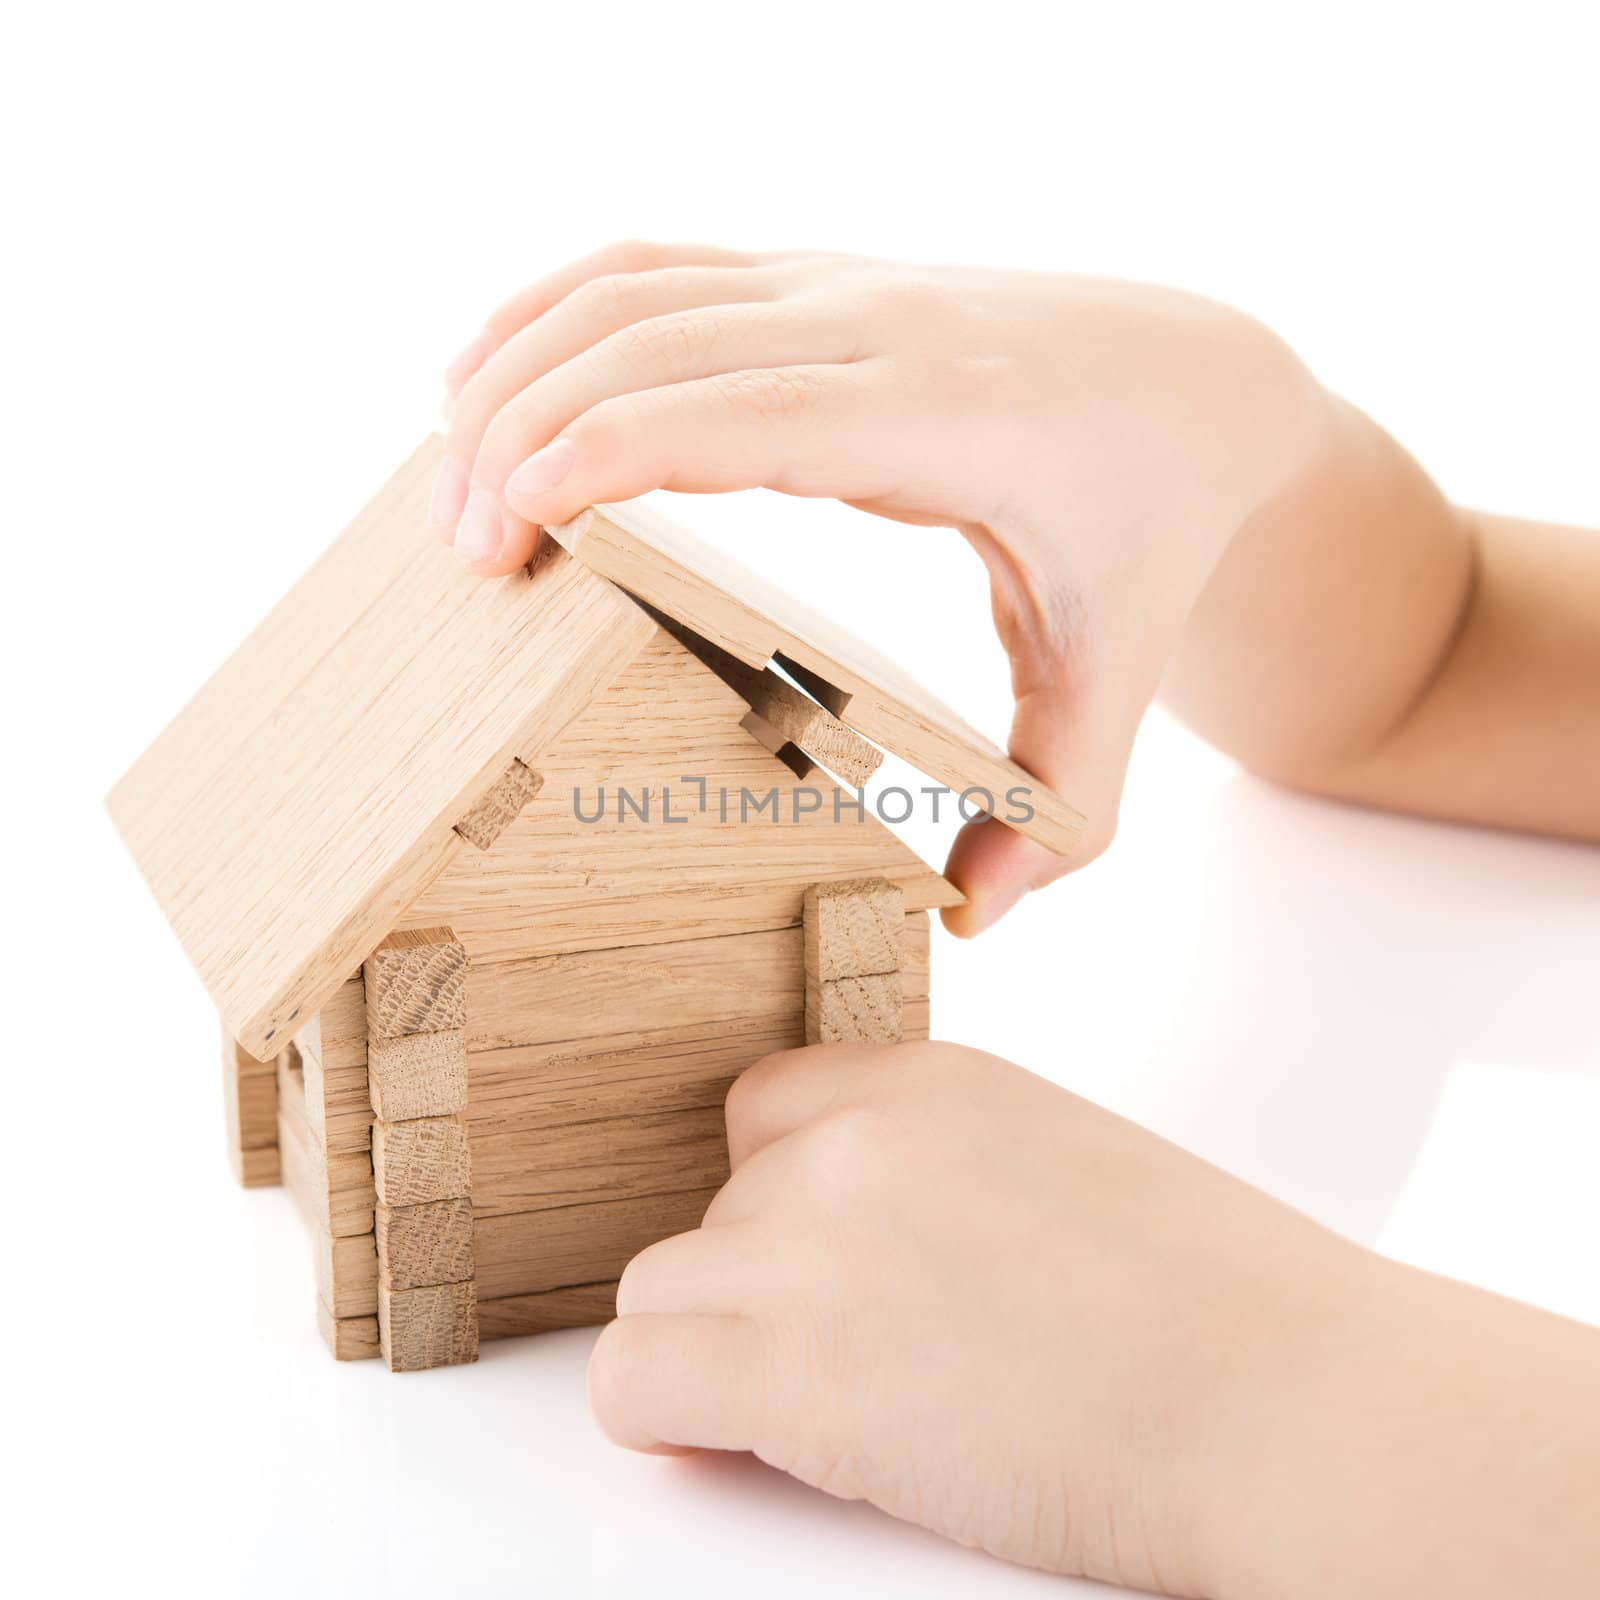 Child hands build a house by Emevil